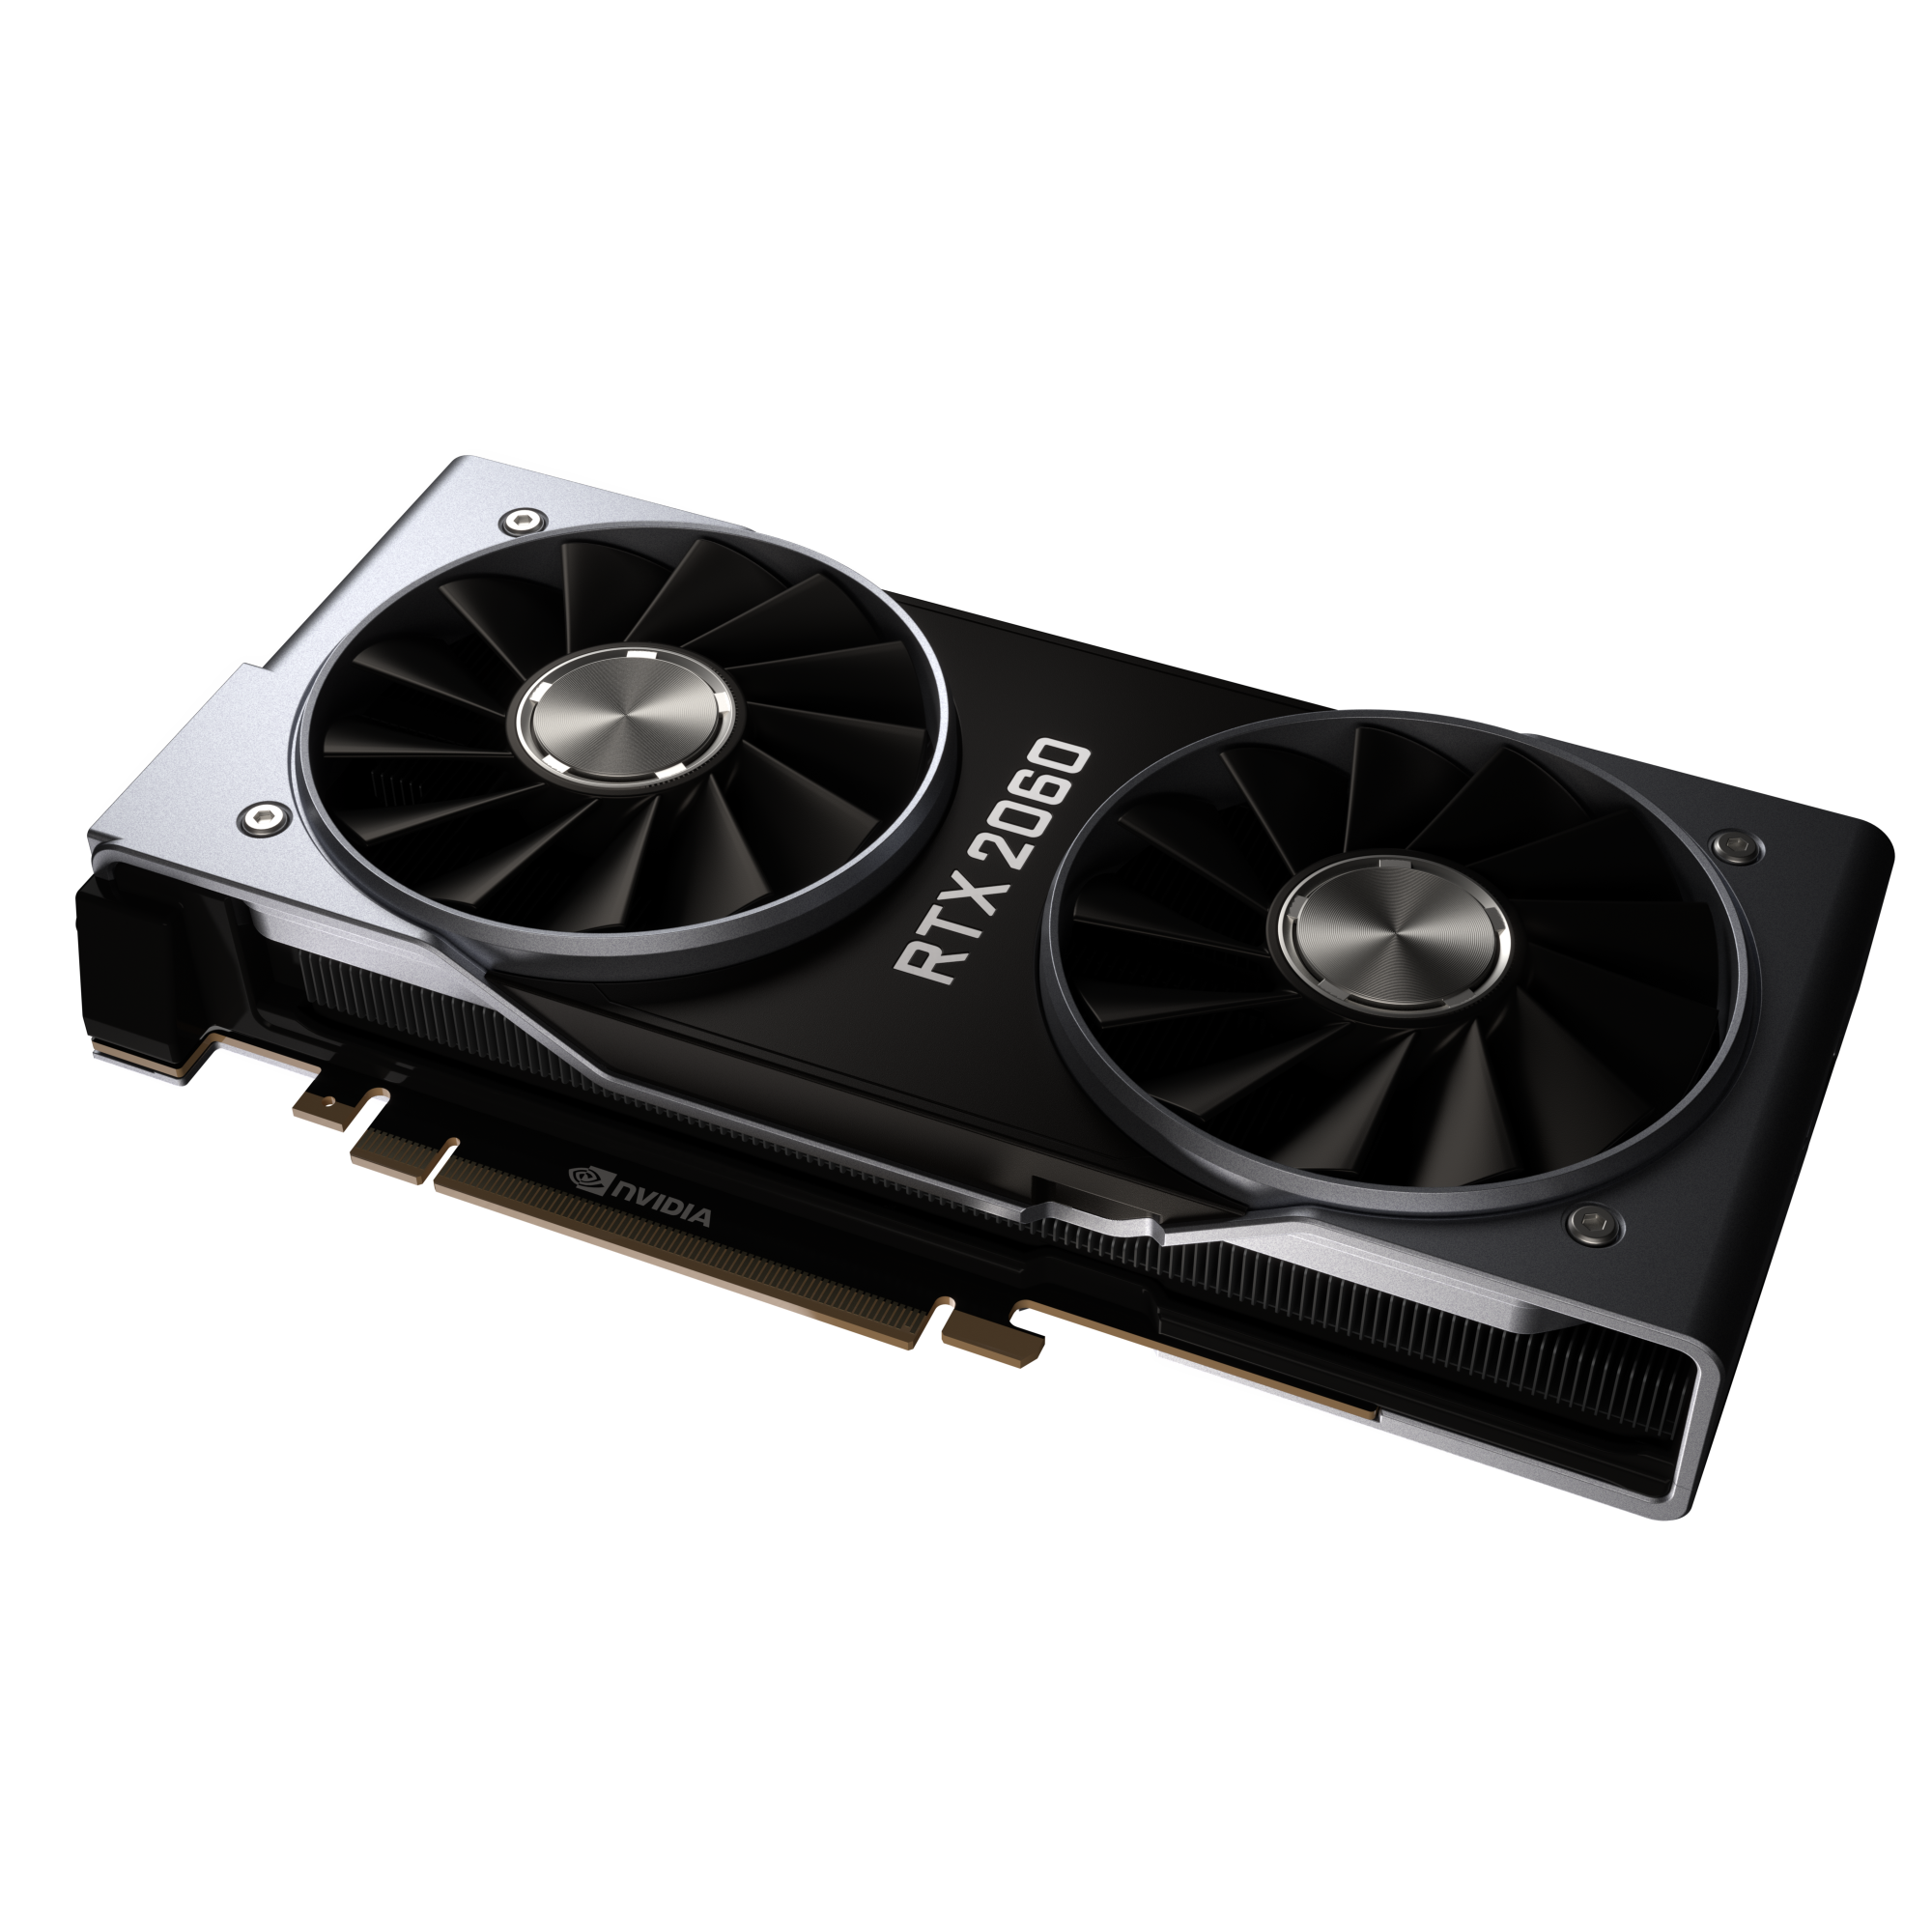 Introducing The GeForce RTX 2060: Turing For Every Gamer, GeForce News